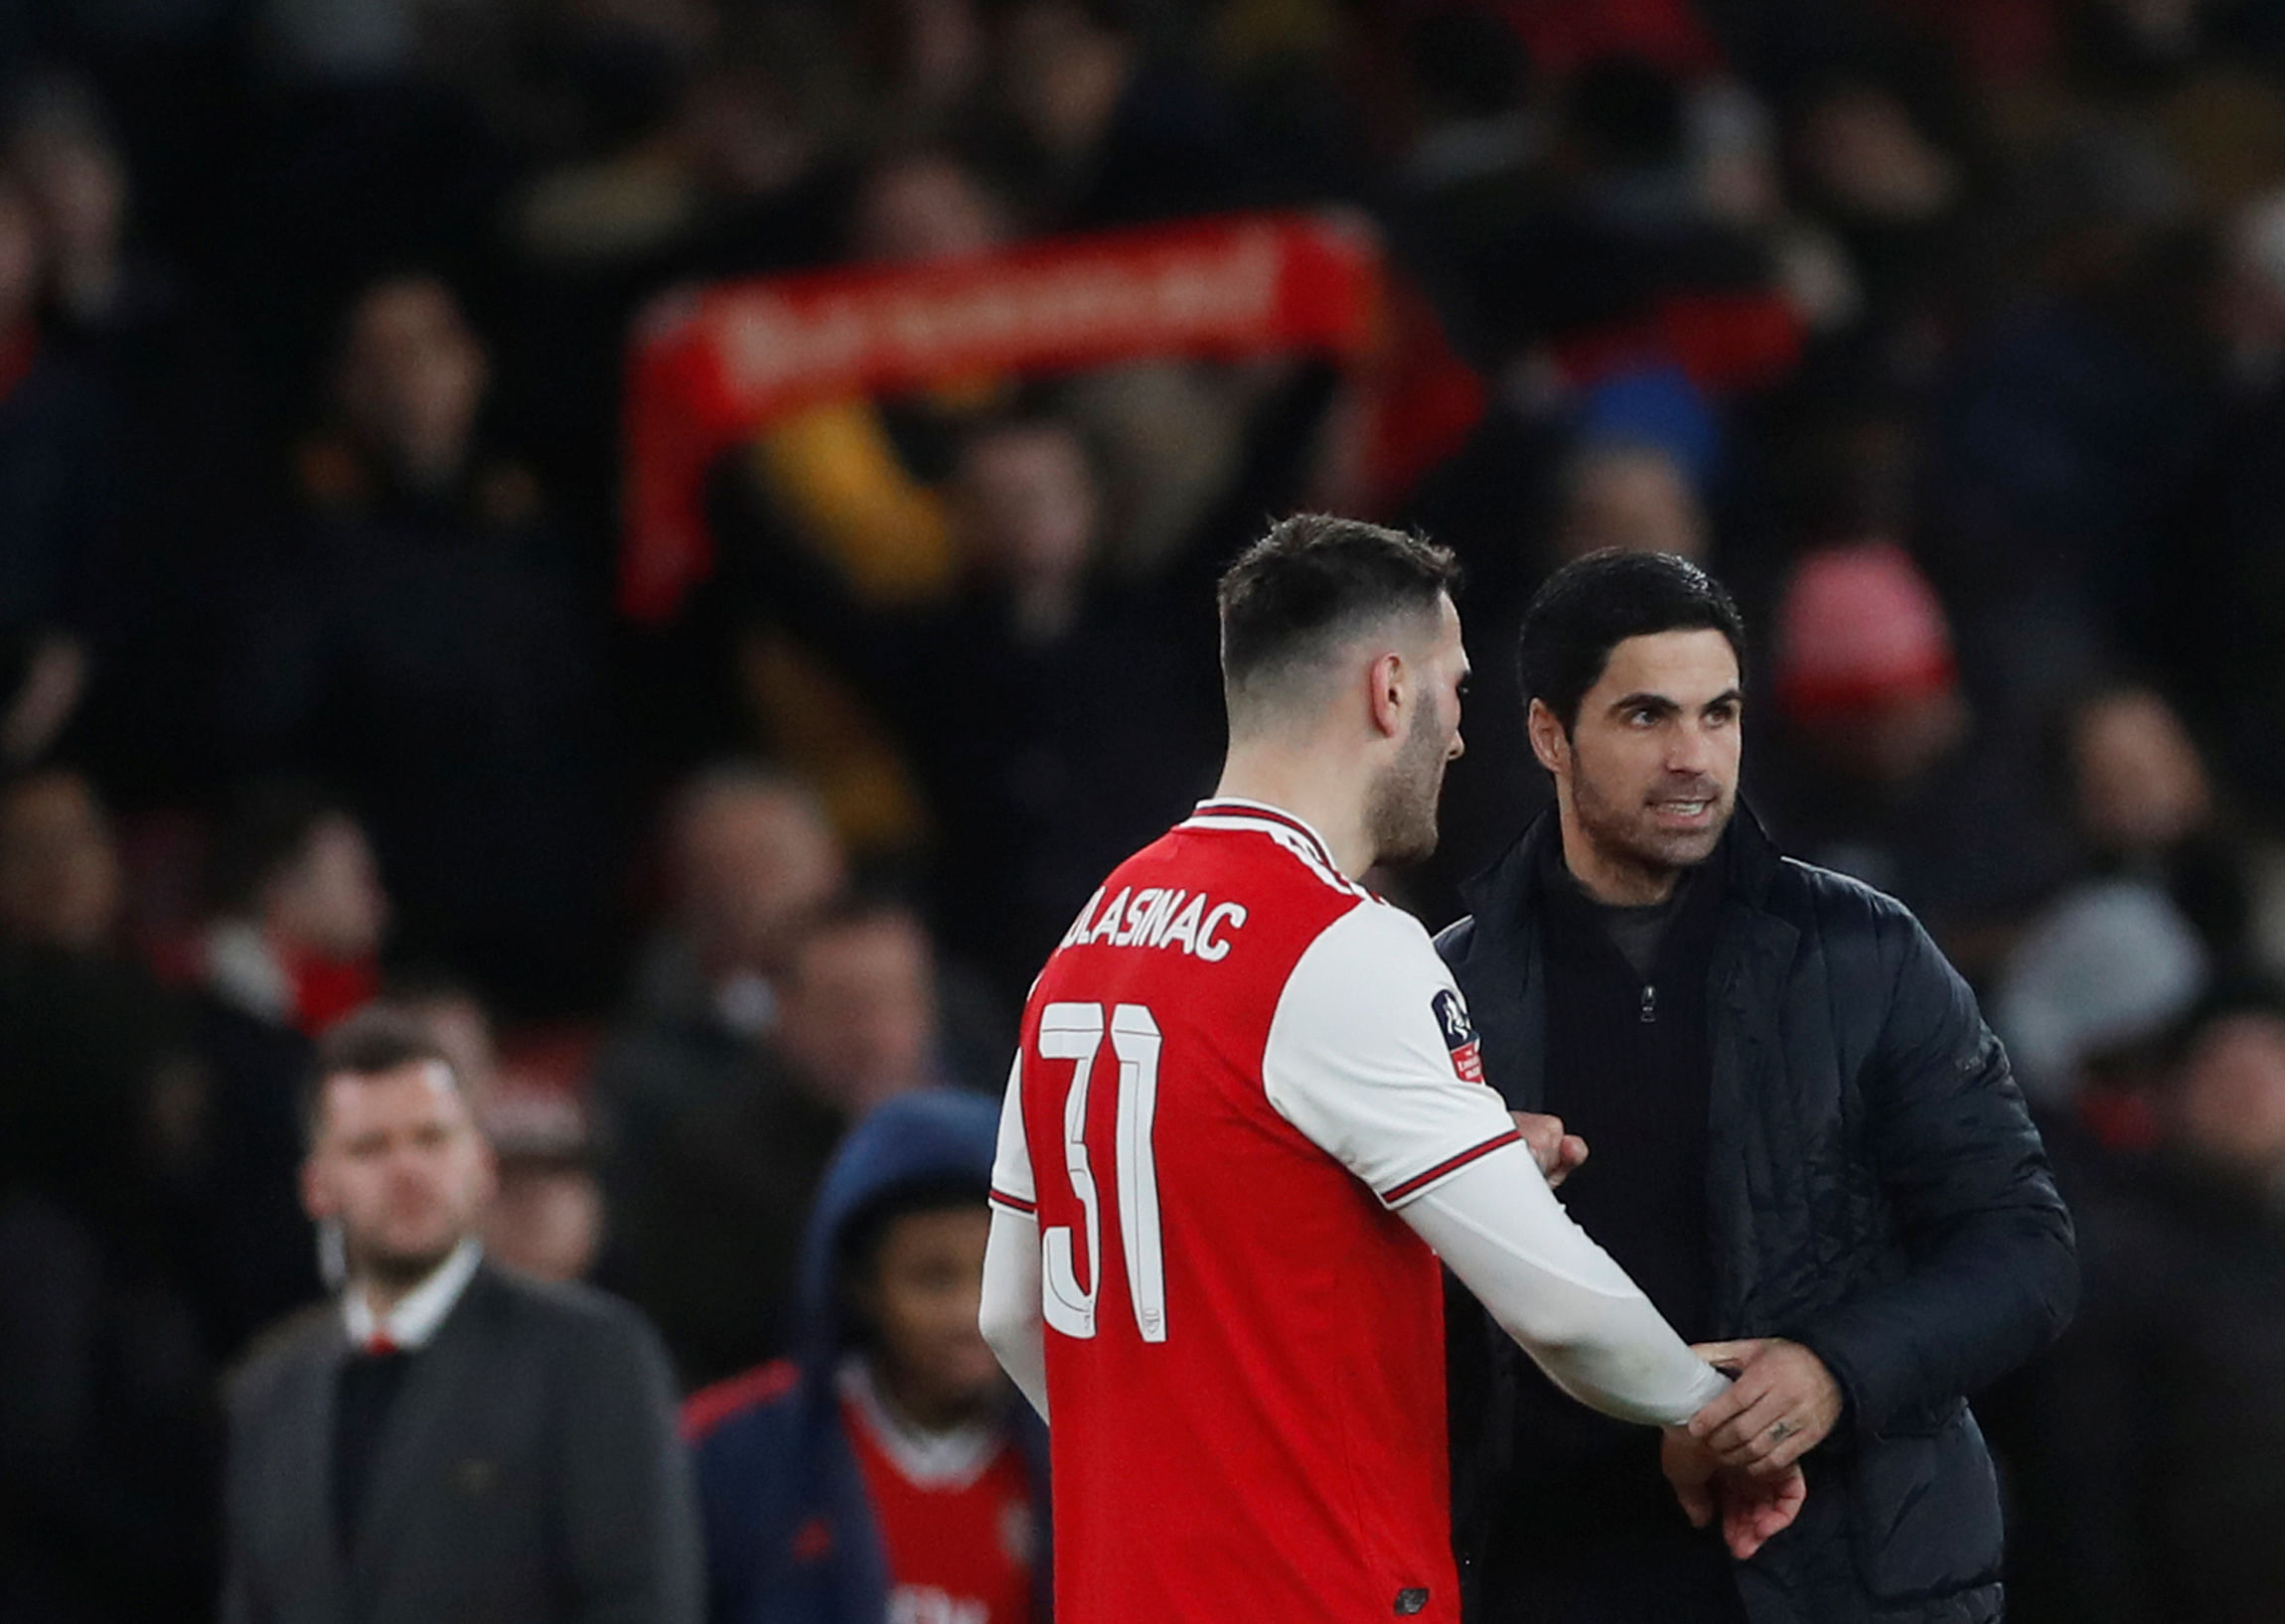 Arsenal manager Mikel Arteta celebrates with Sead Kolasinac after the match. (Reuters Photo)